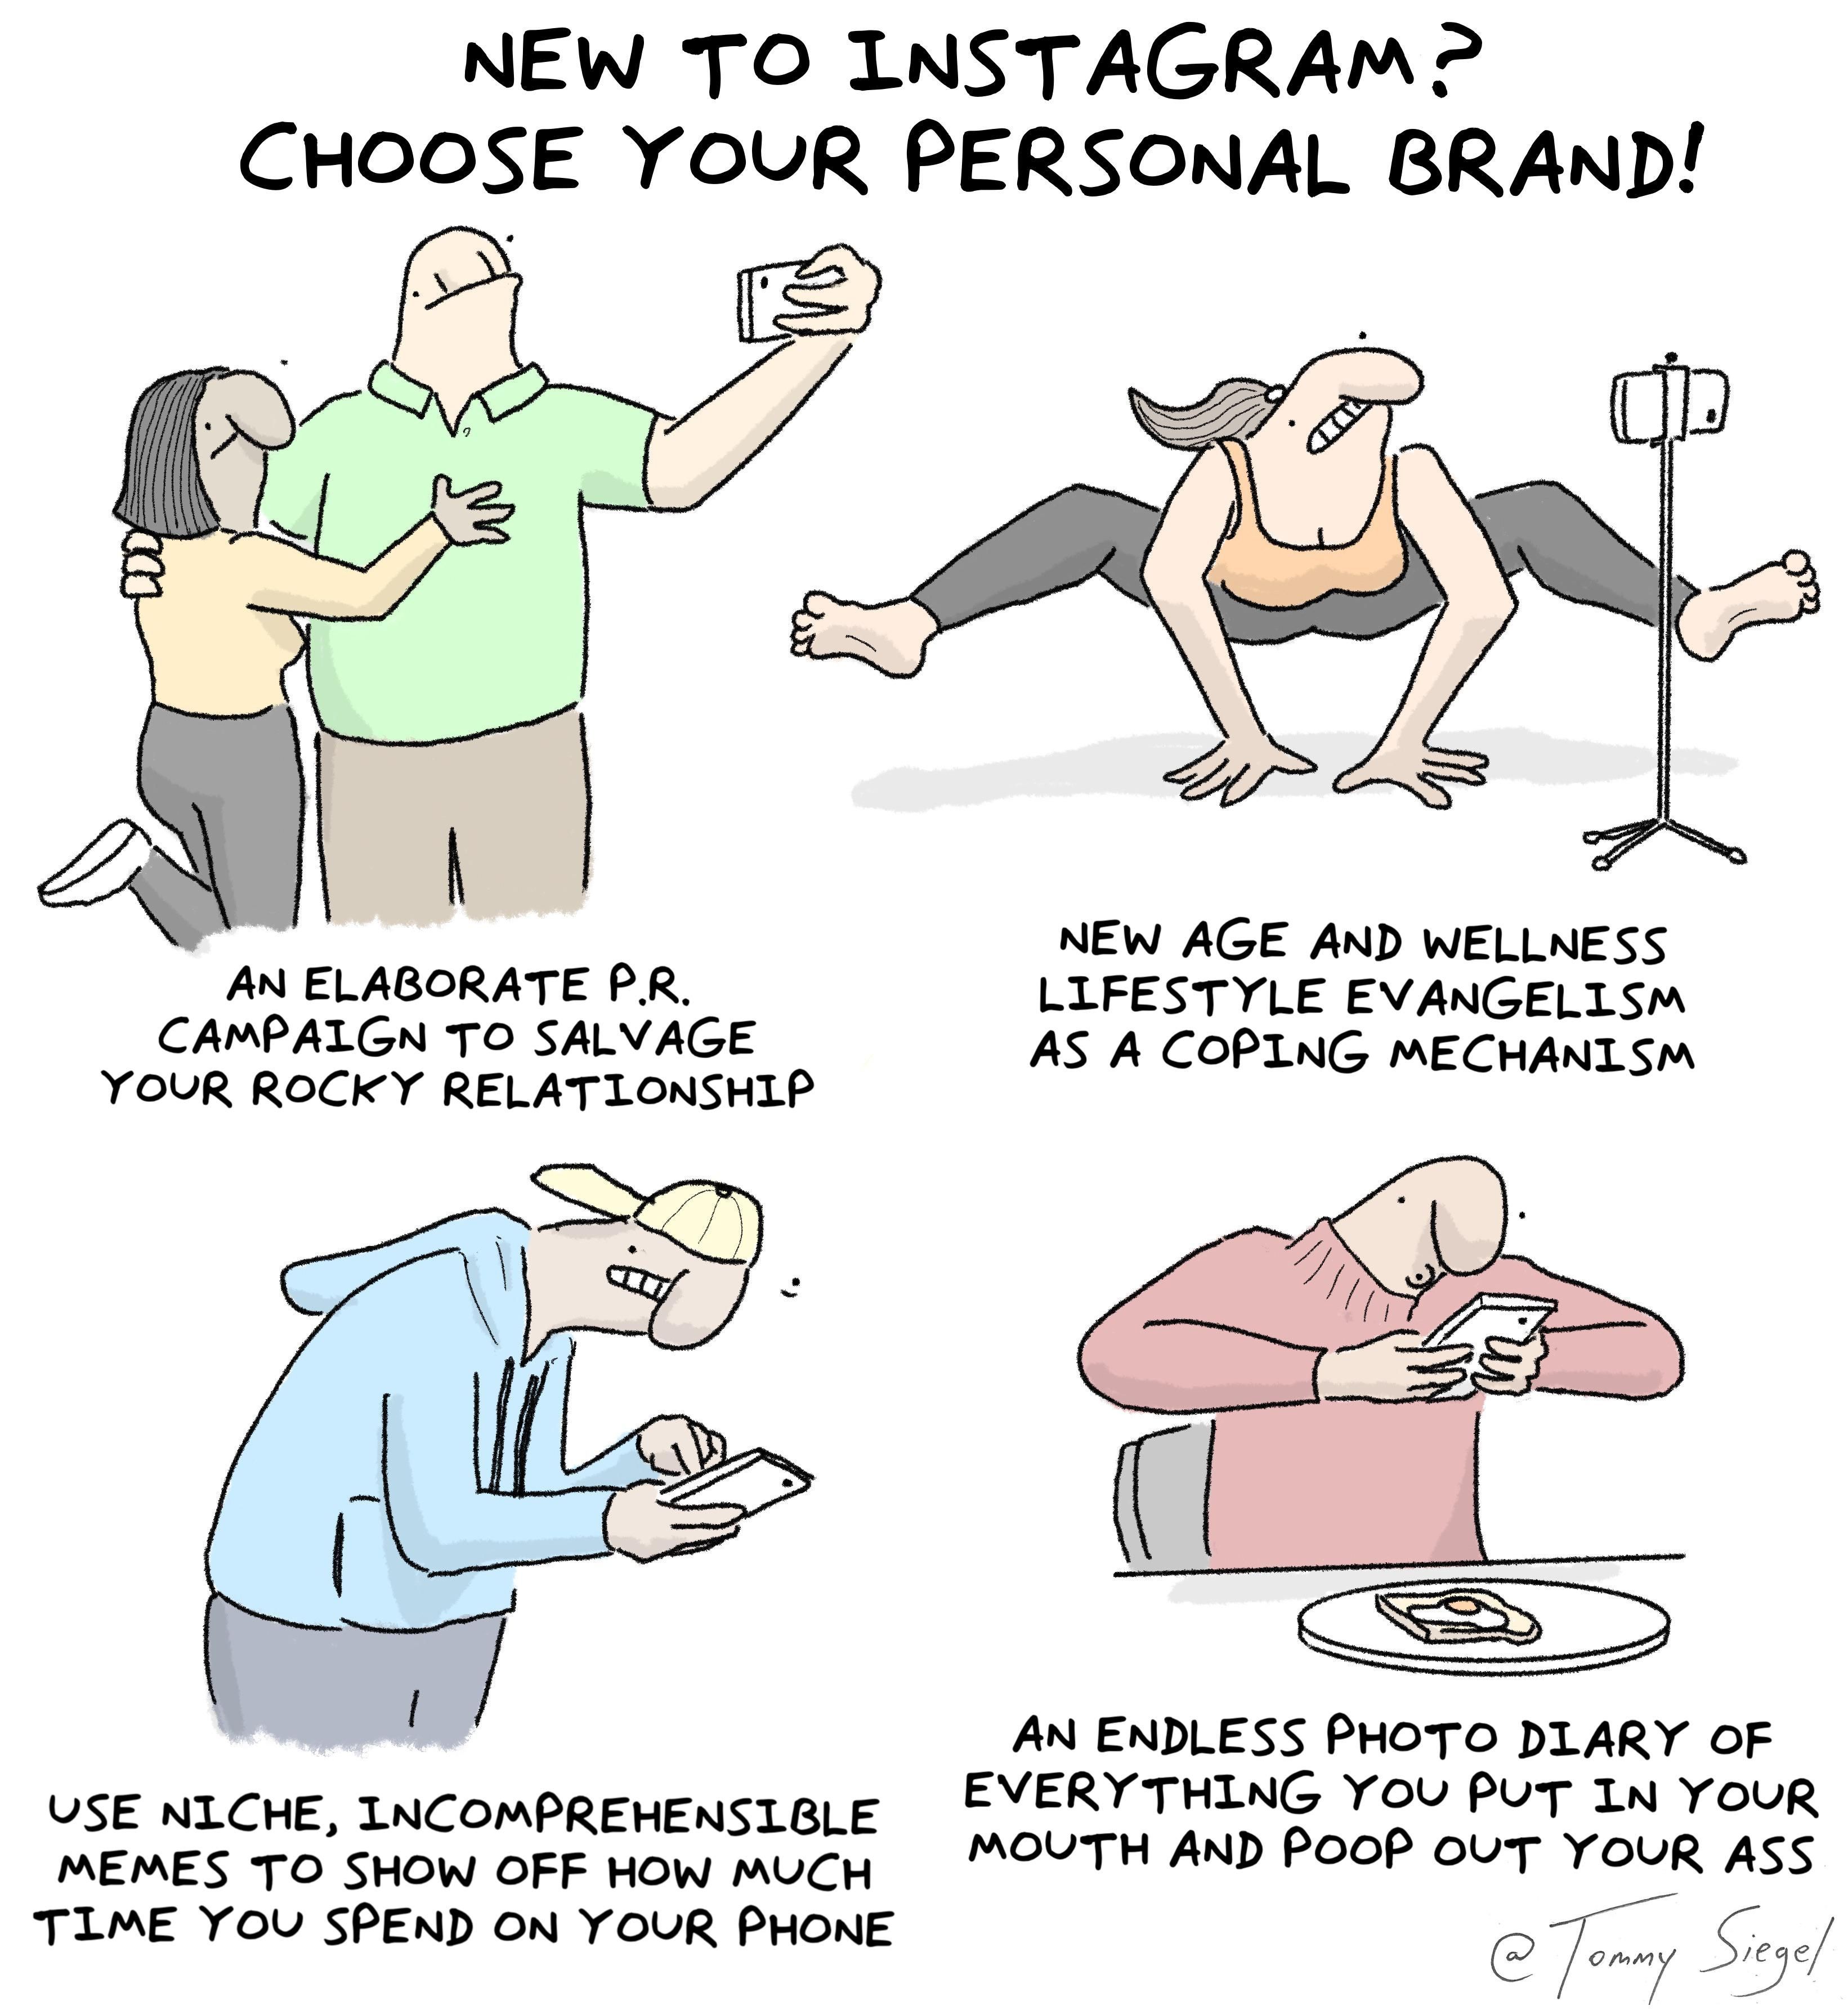 choose your personal brand on Instagram